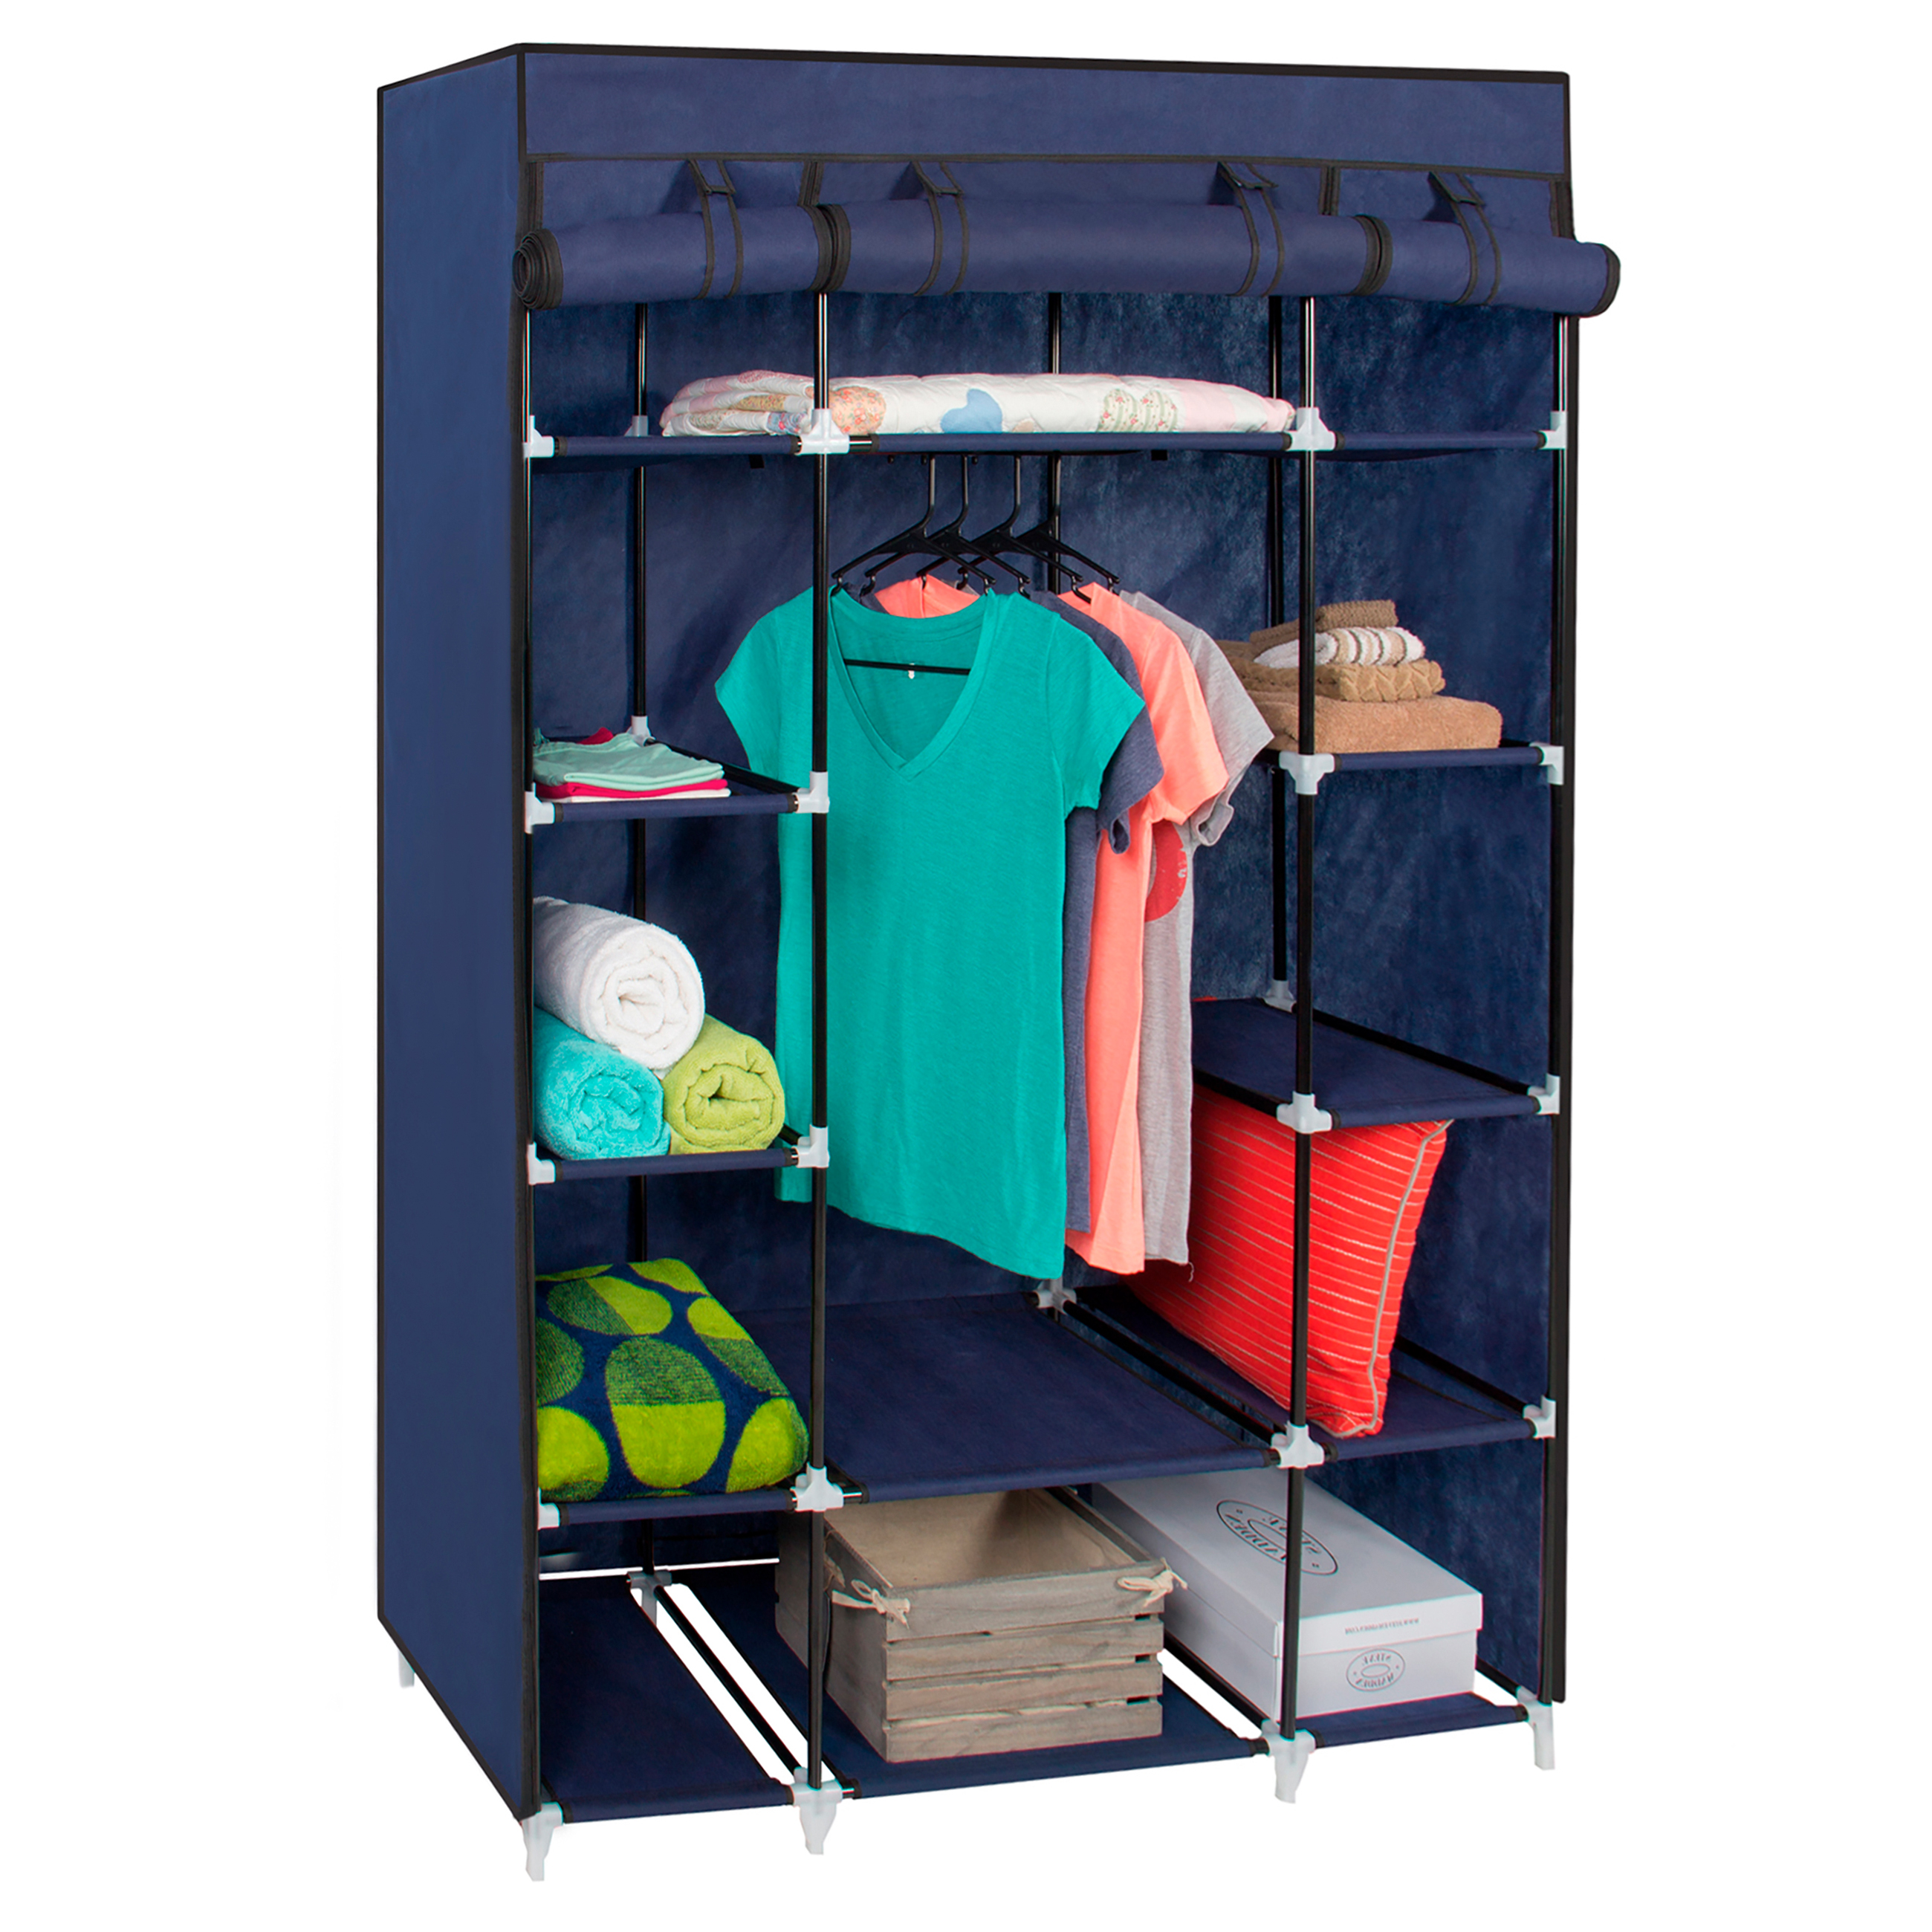 Best Choice Products 13-Shelf Portable Fabric Closet Wardrobe Storage Organizer w/ Cover and Hanging Rod - Blue - image 1 of 5